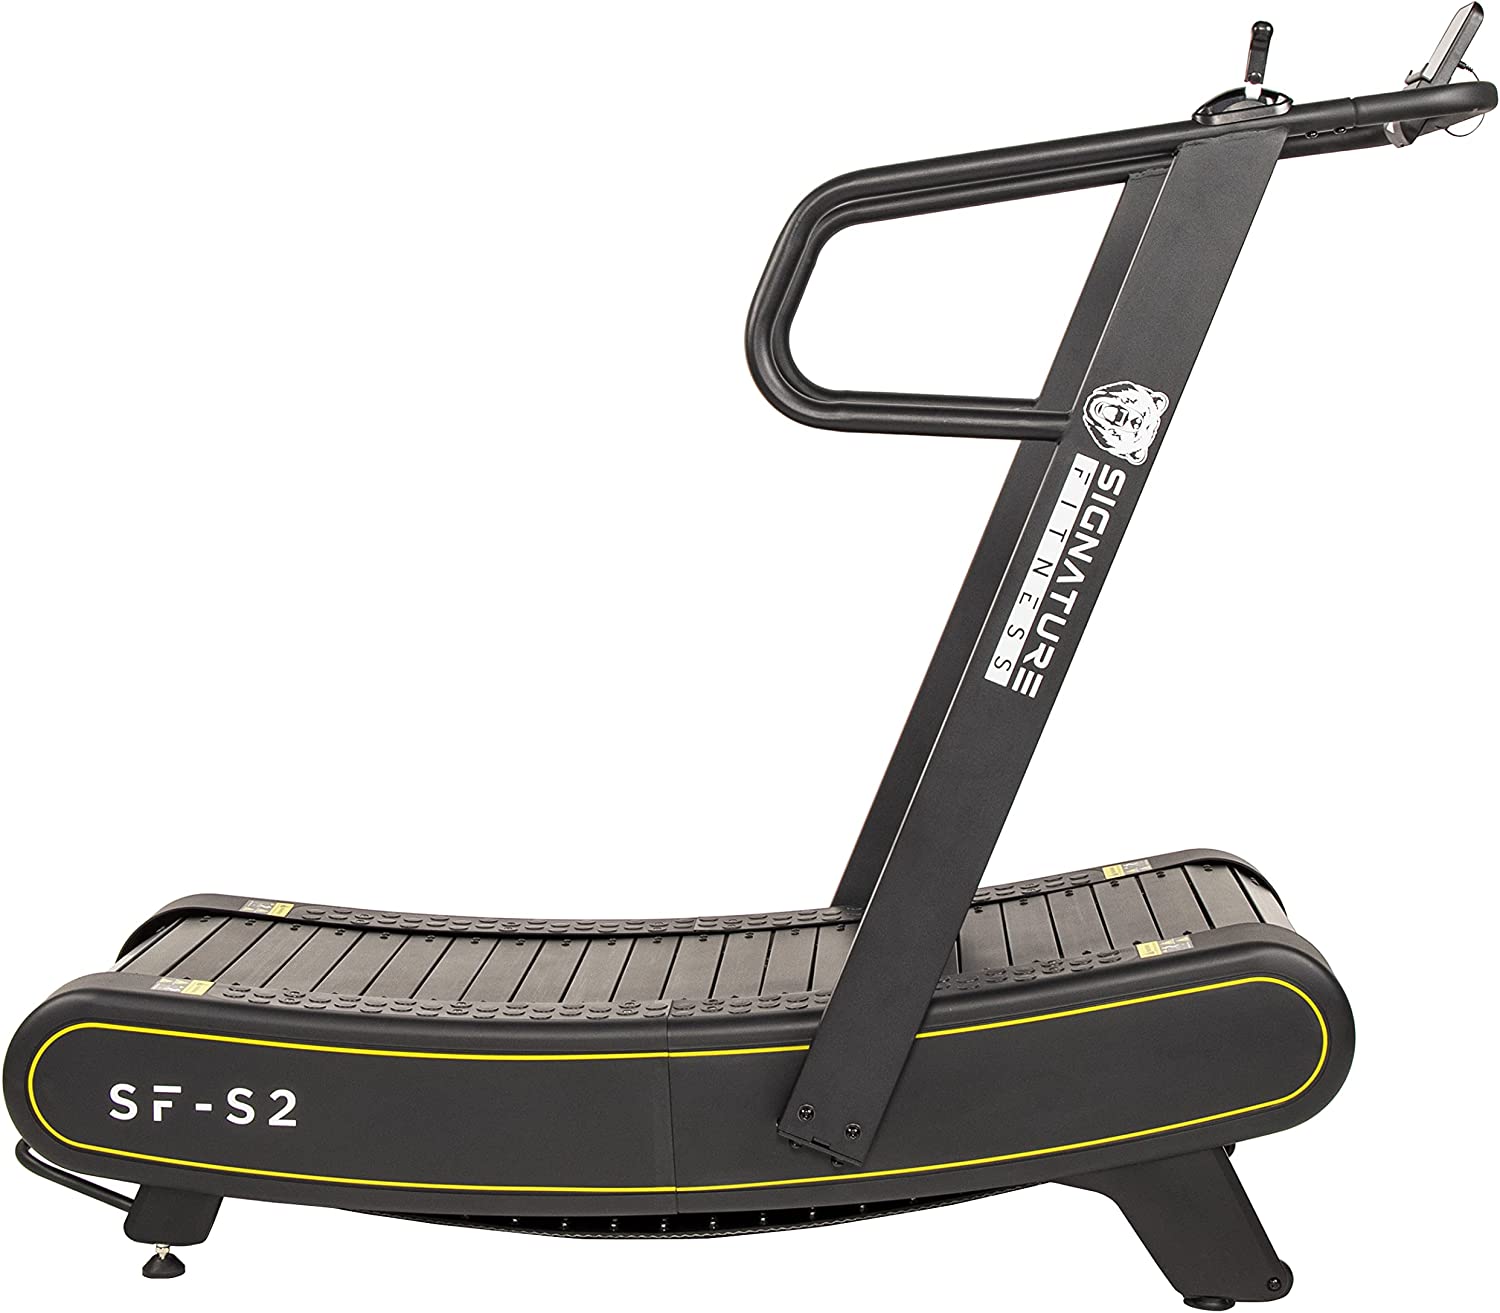 Signature Fitness SF-S2 Sprint Demon - Motorless Curved Sprint Treadmill with Adjustable Levels of Resistance - 300 lb Capacity - image 3 of 11